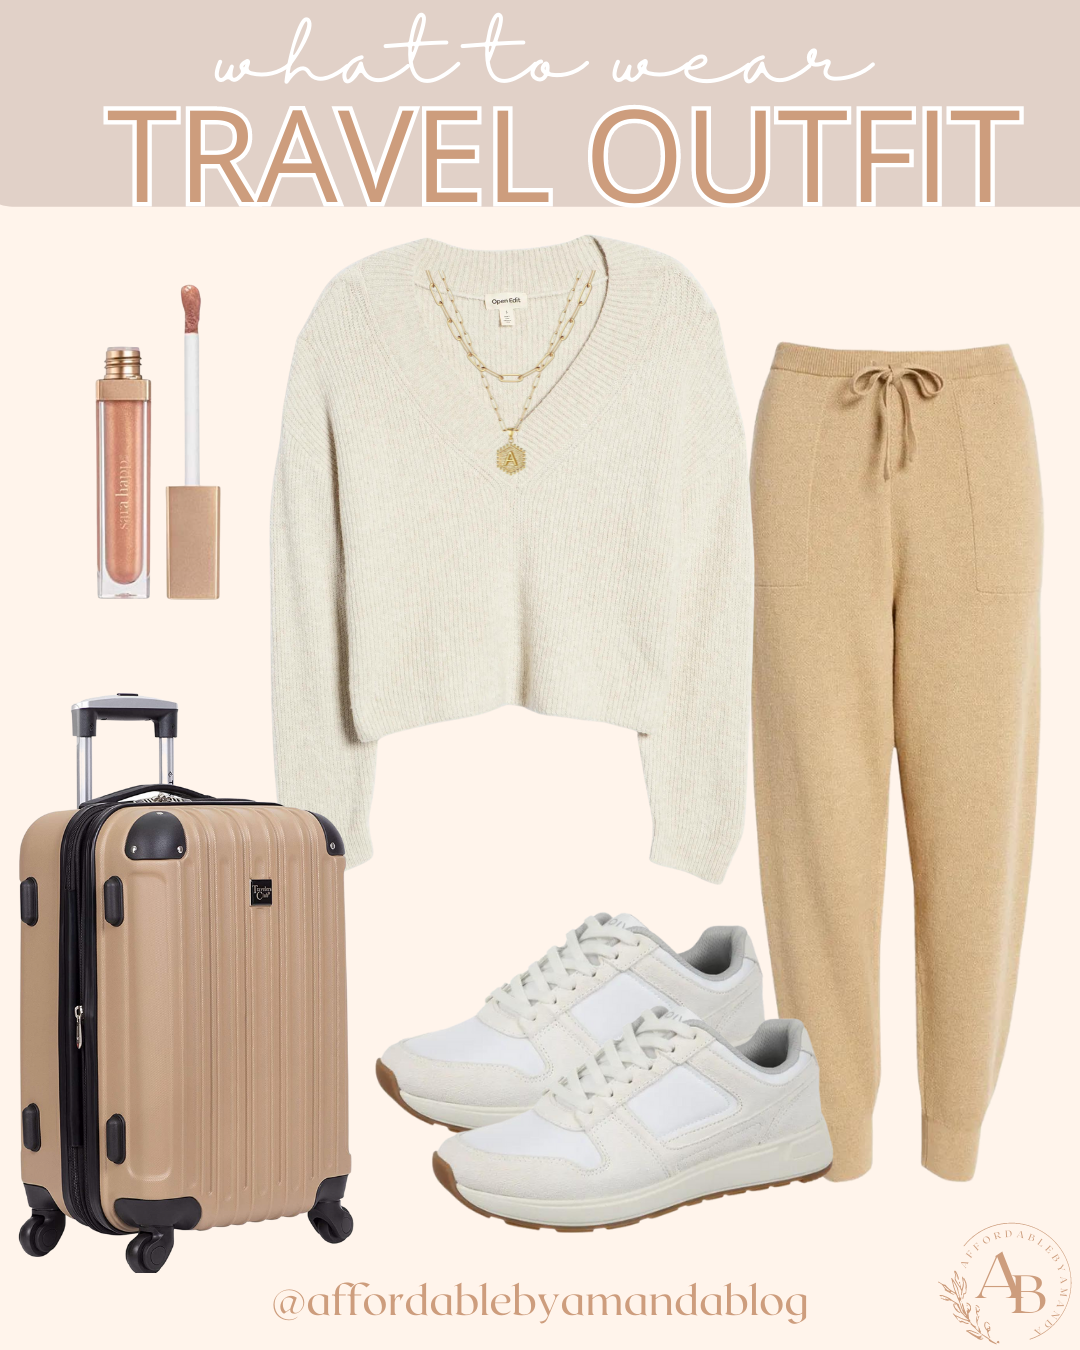 Summer Travel Outfit Ideas - Affordable by Amanda